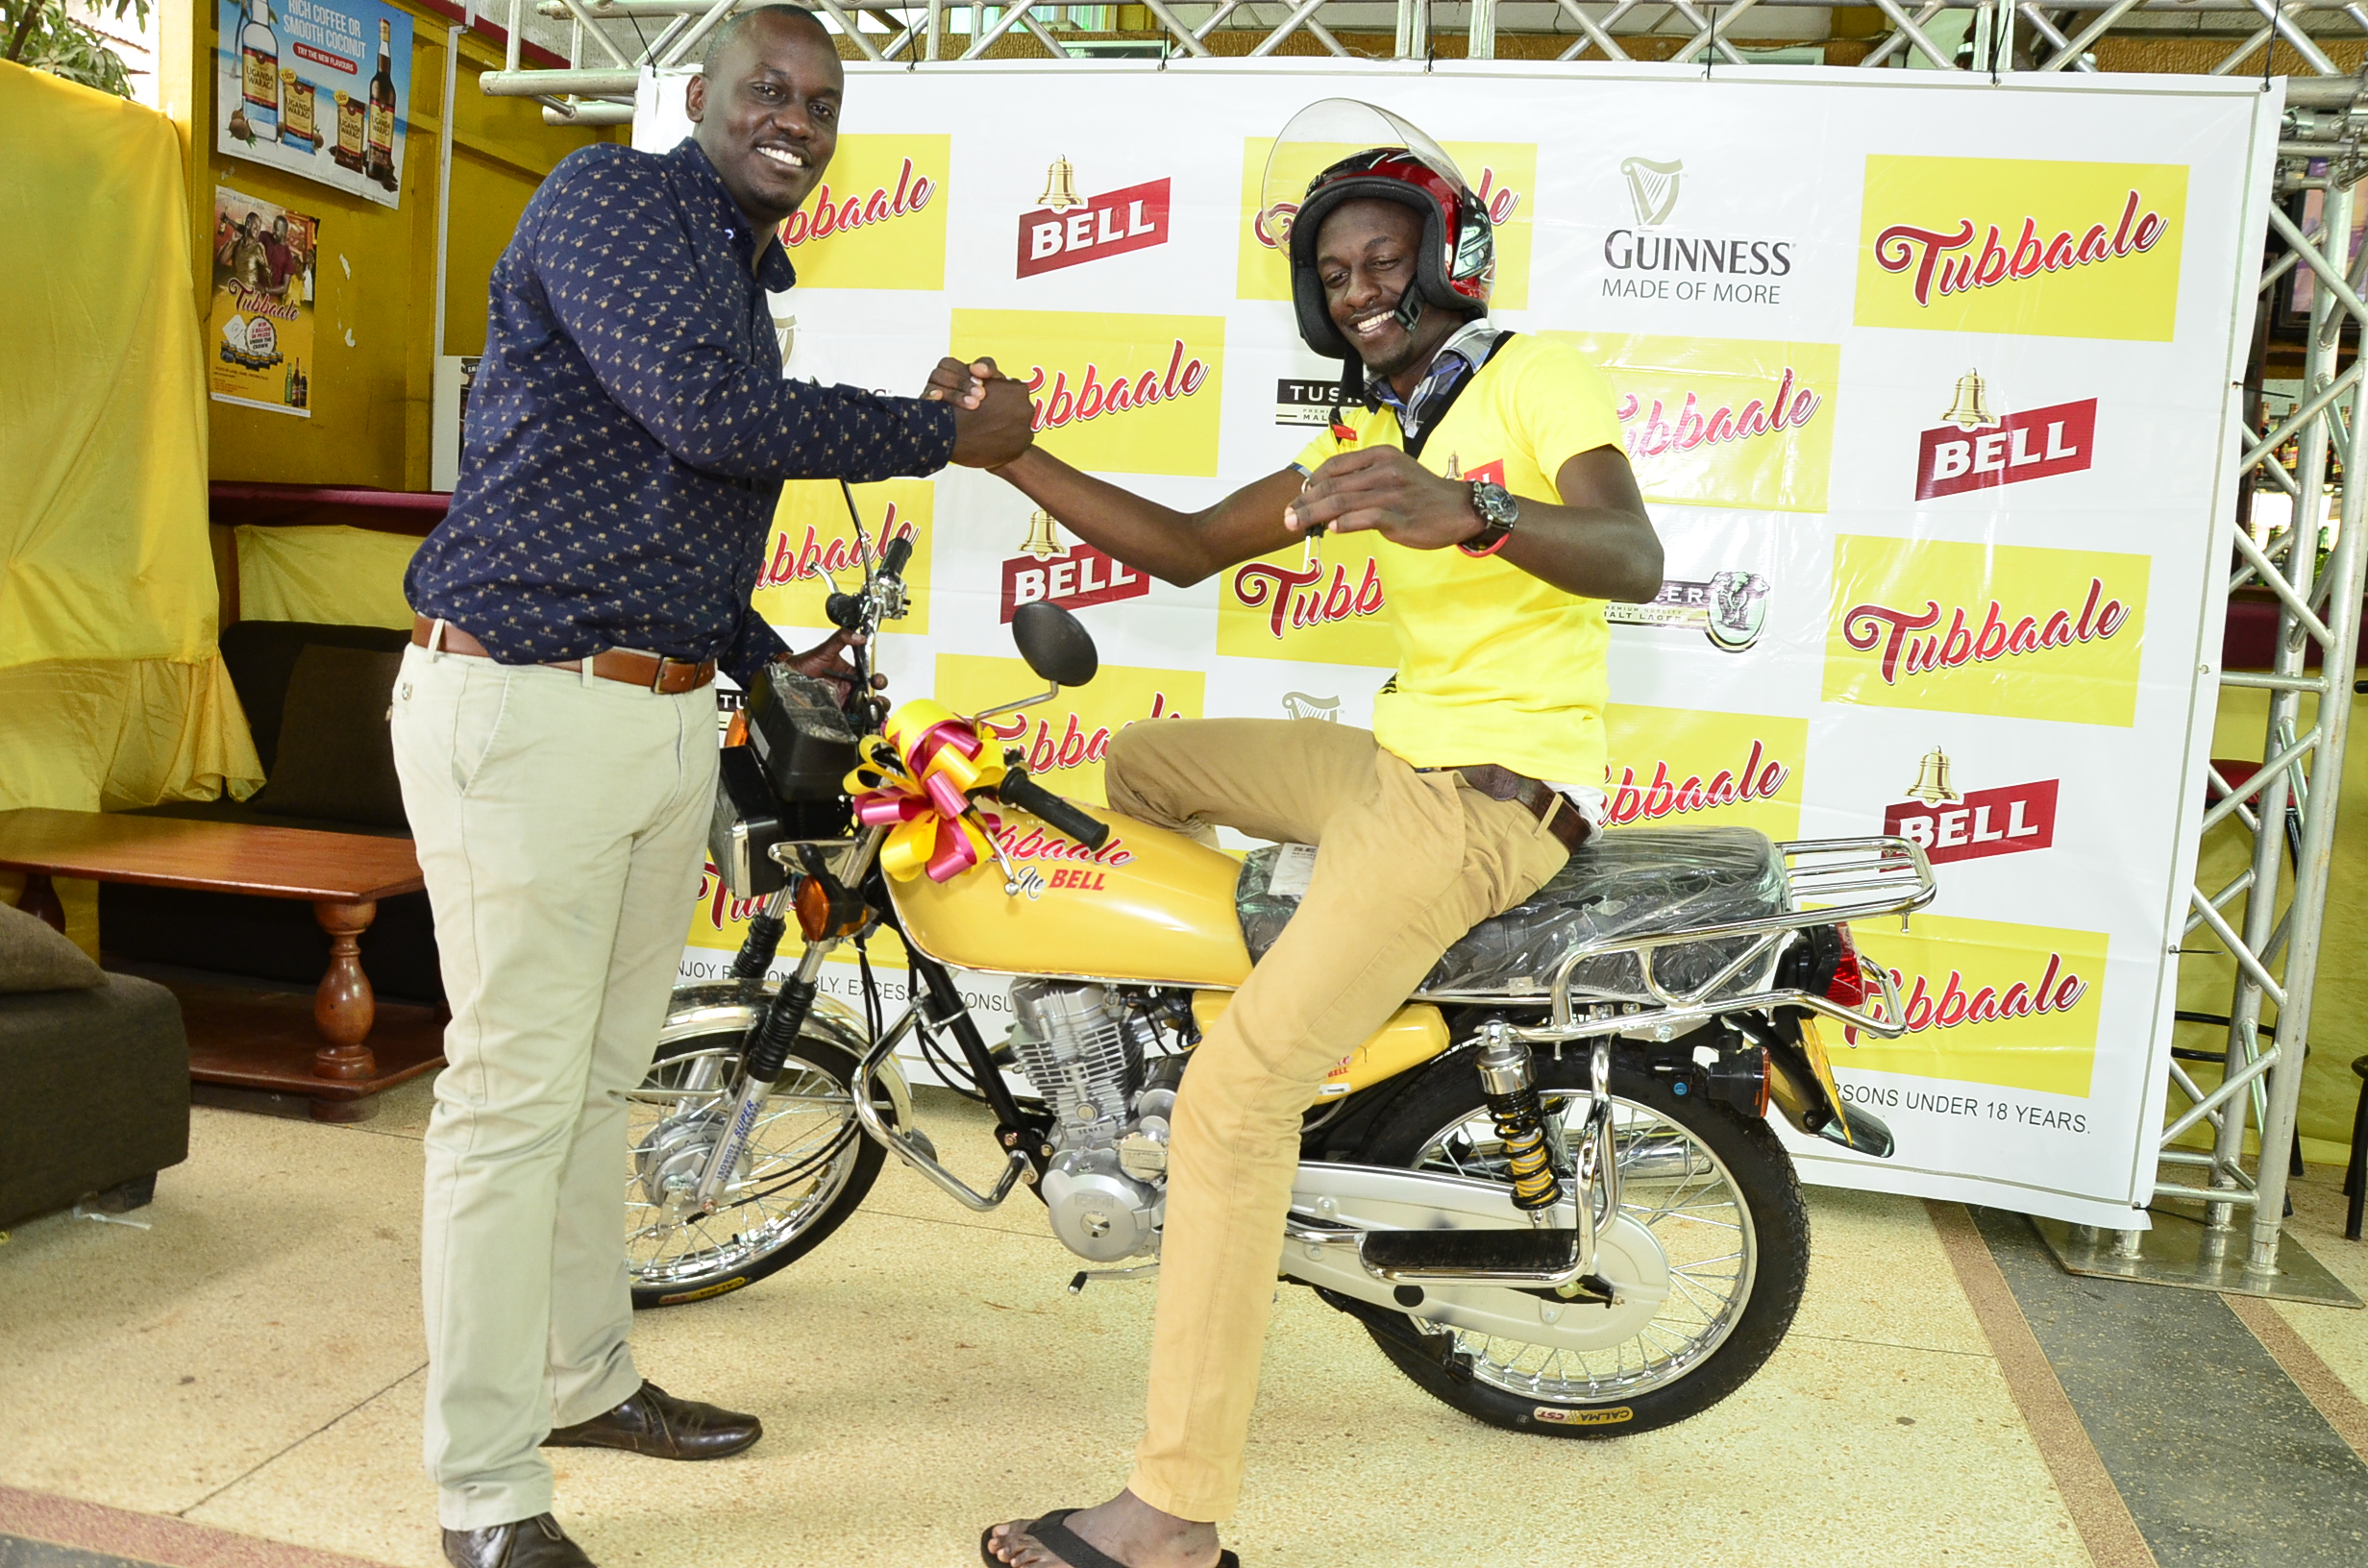 (L-R) Brian Seruyiggo, Customer Marketing Manager-Bell Lager congratulates Muwanika James on participating and winning a motorcycle in the Tubbaale promotion.